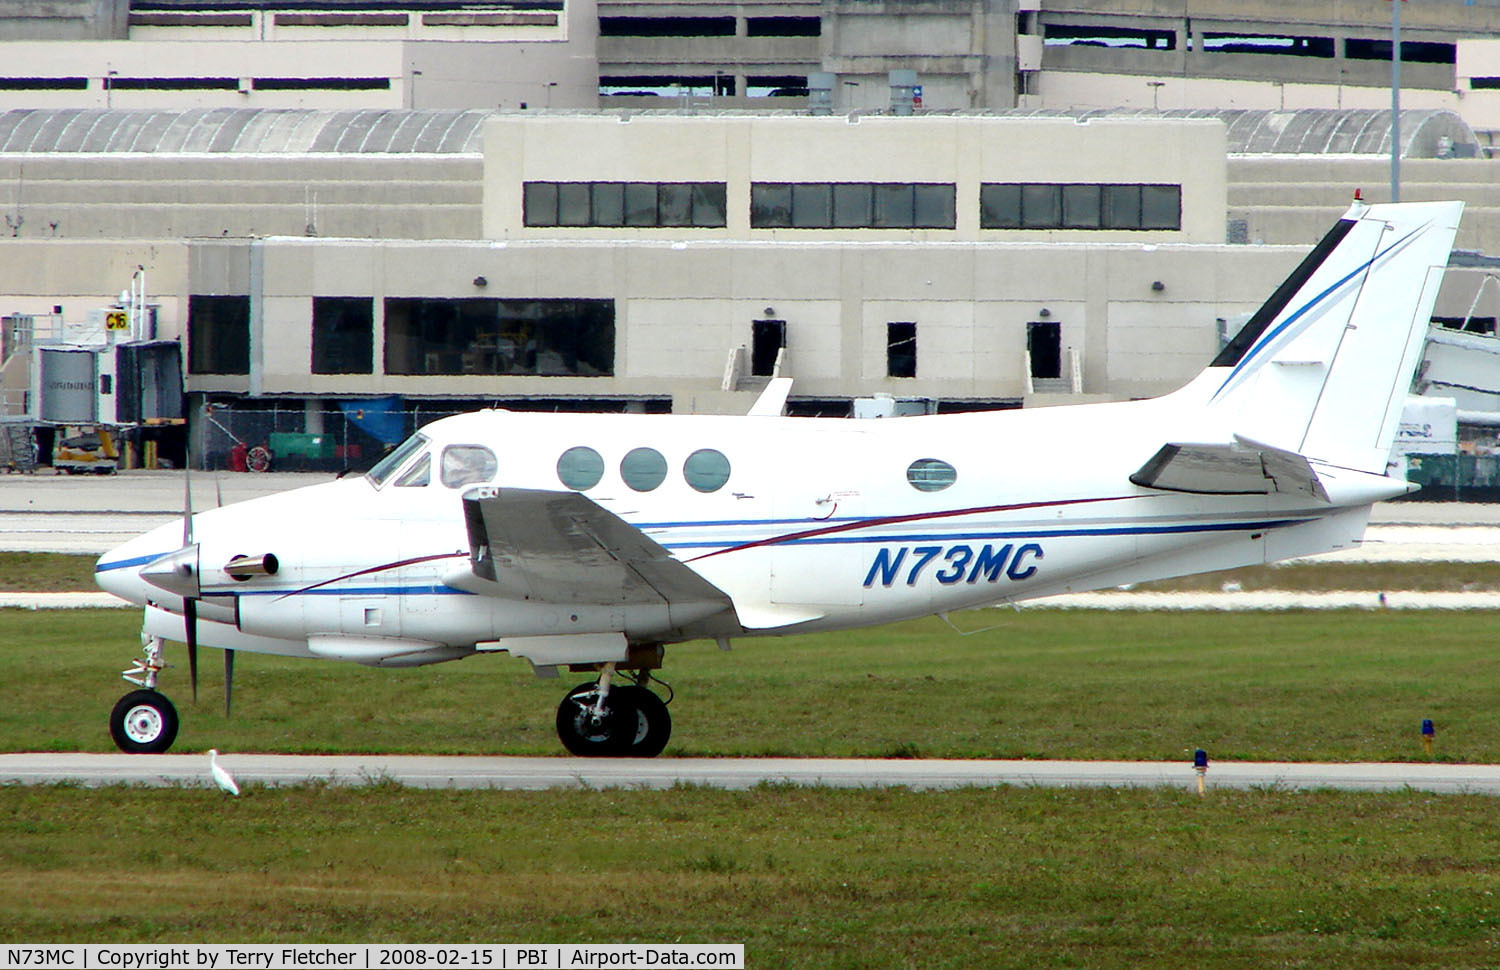 N73MC, 1973 Beech C90 King Air C/N LJ-600, The business aircraft traffic at West Palm Beach on the Friday before President's Day always provides the aviation enthusiast / photographer with a treat